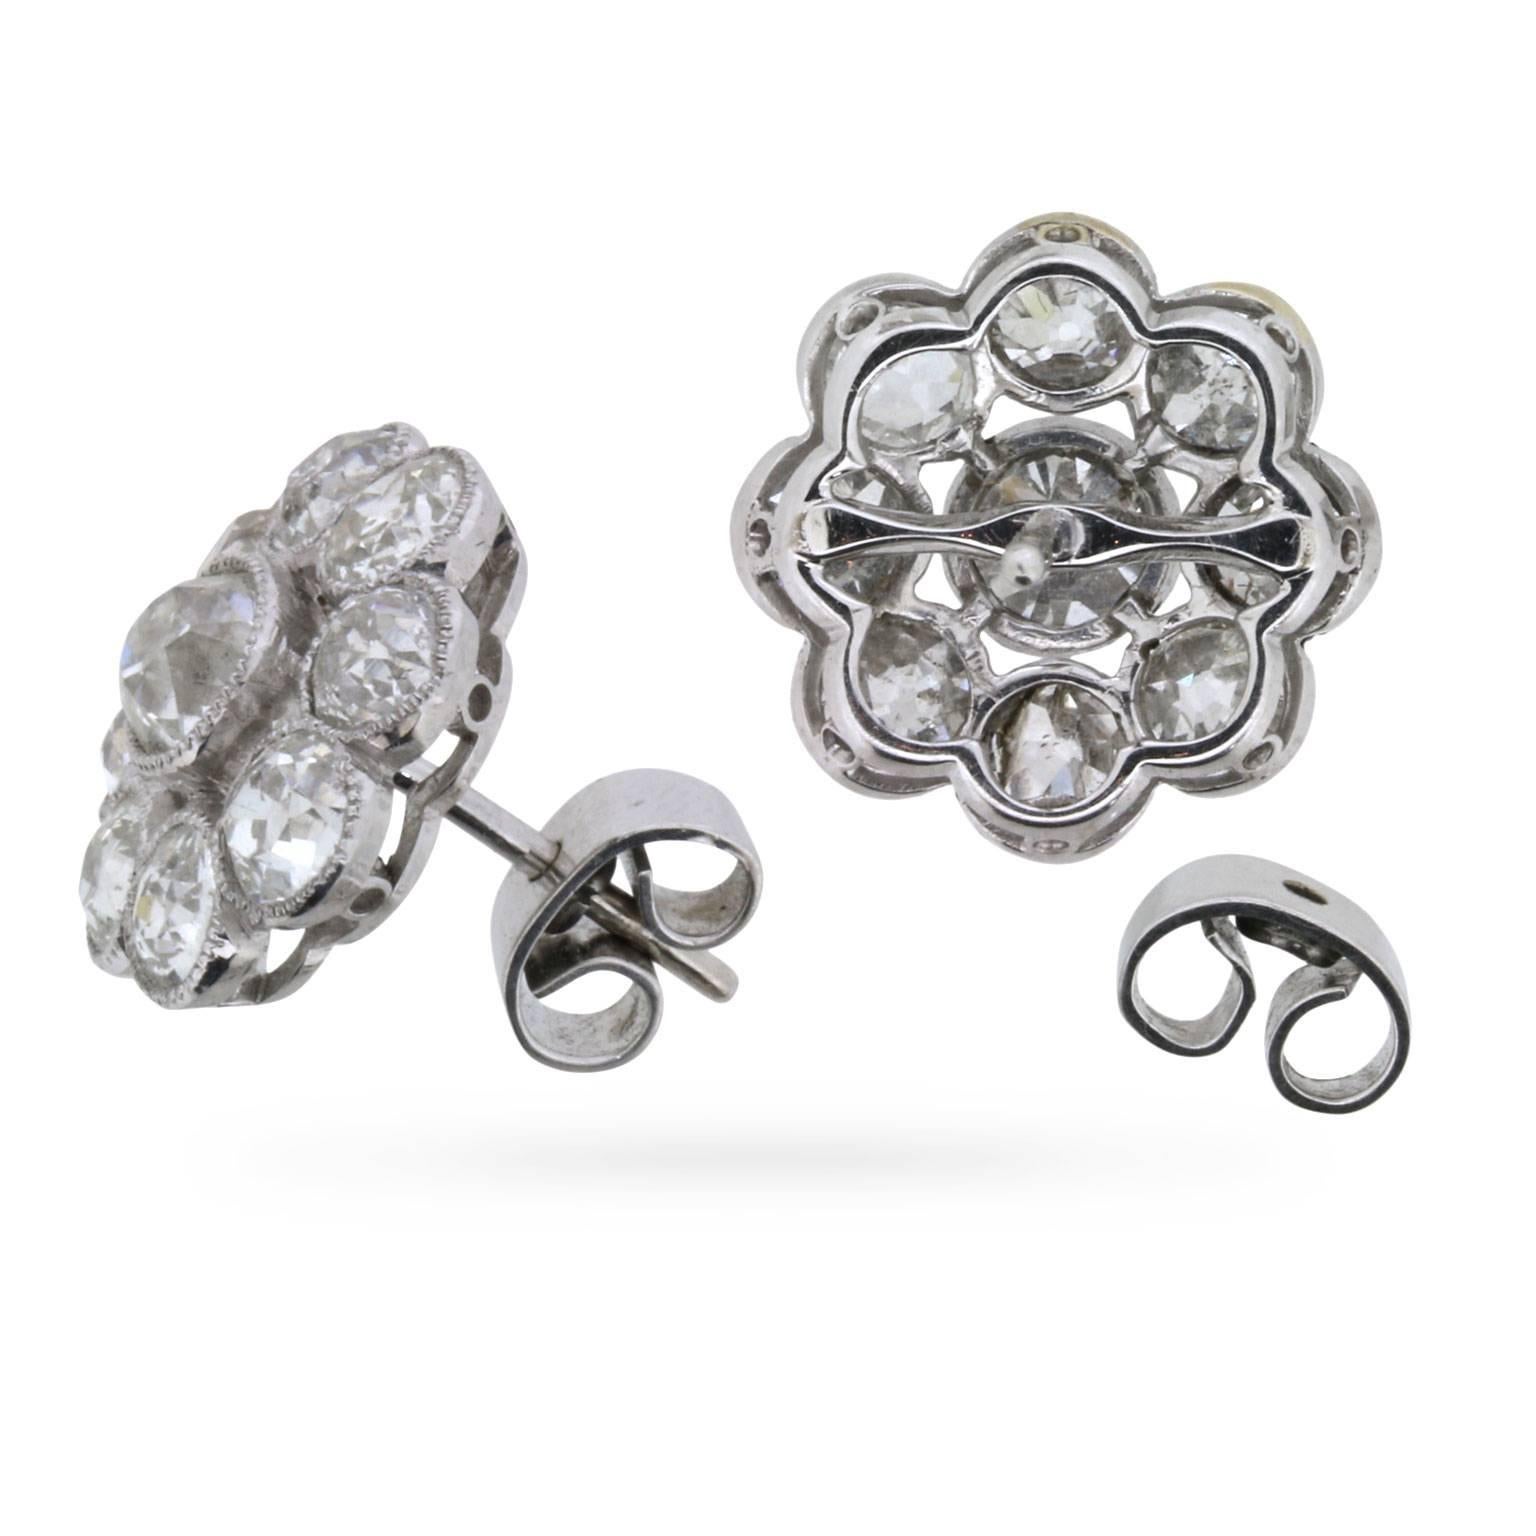 Dating back to the 1930s, these fabulous diamond cluster earrings feature a matching pair of old cut diamonds, each encircled by a glittering ensemble of eight complementary old cuts, all rubover-set in millegrain-edged platinum.

With a total